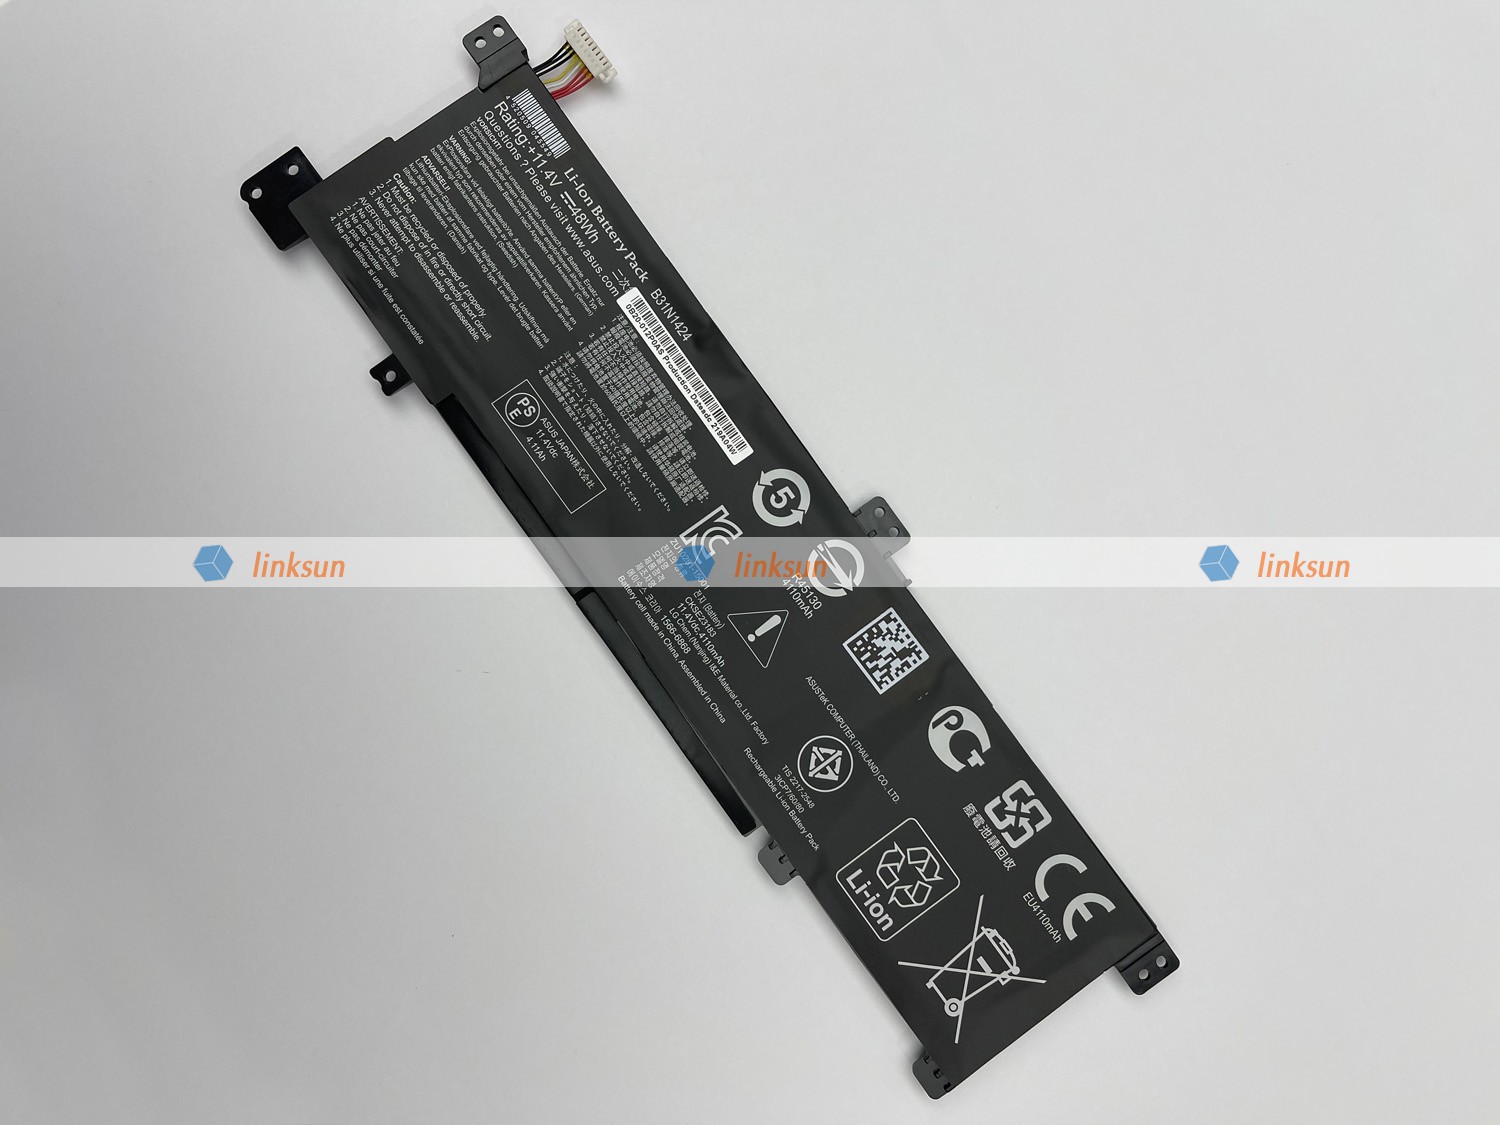 B31N1424 battery inclined